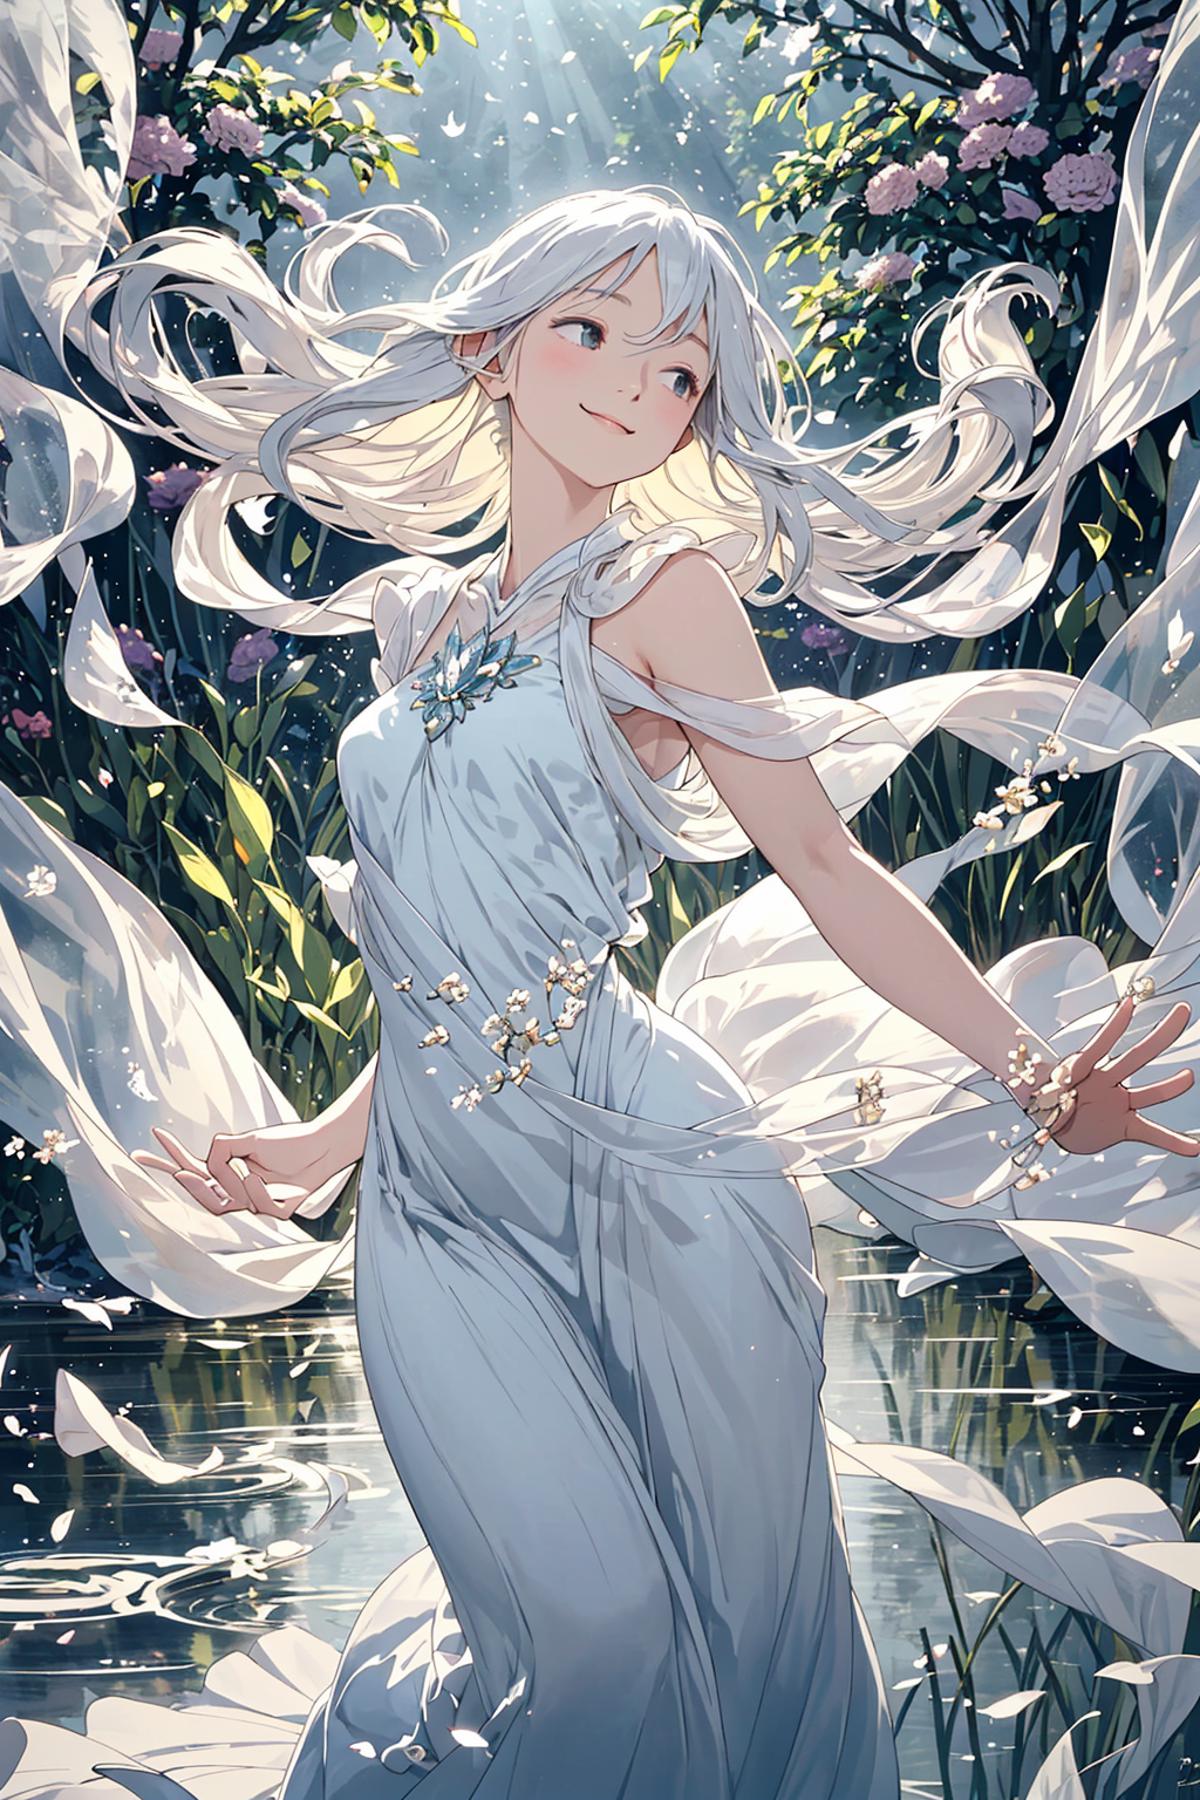 A beautiful fairy with white hair and a flowing dress.